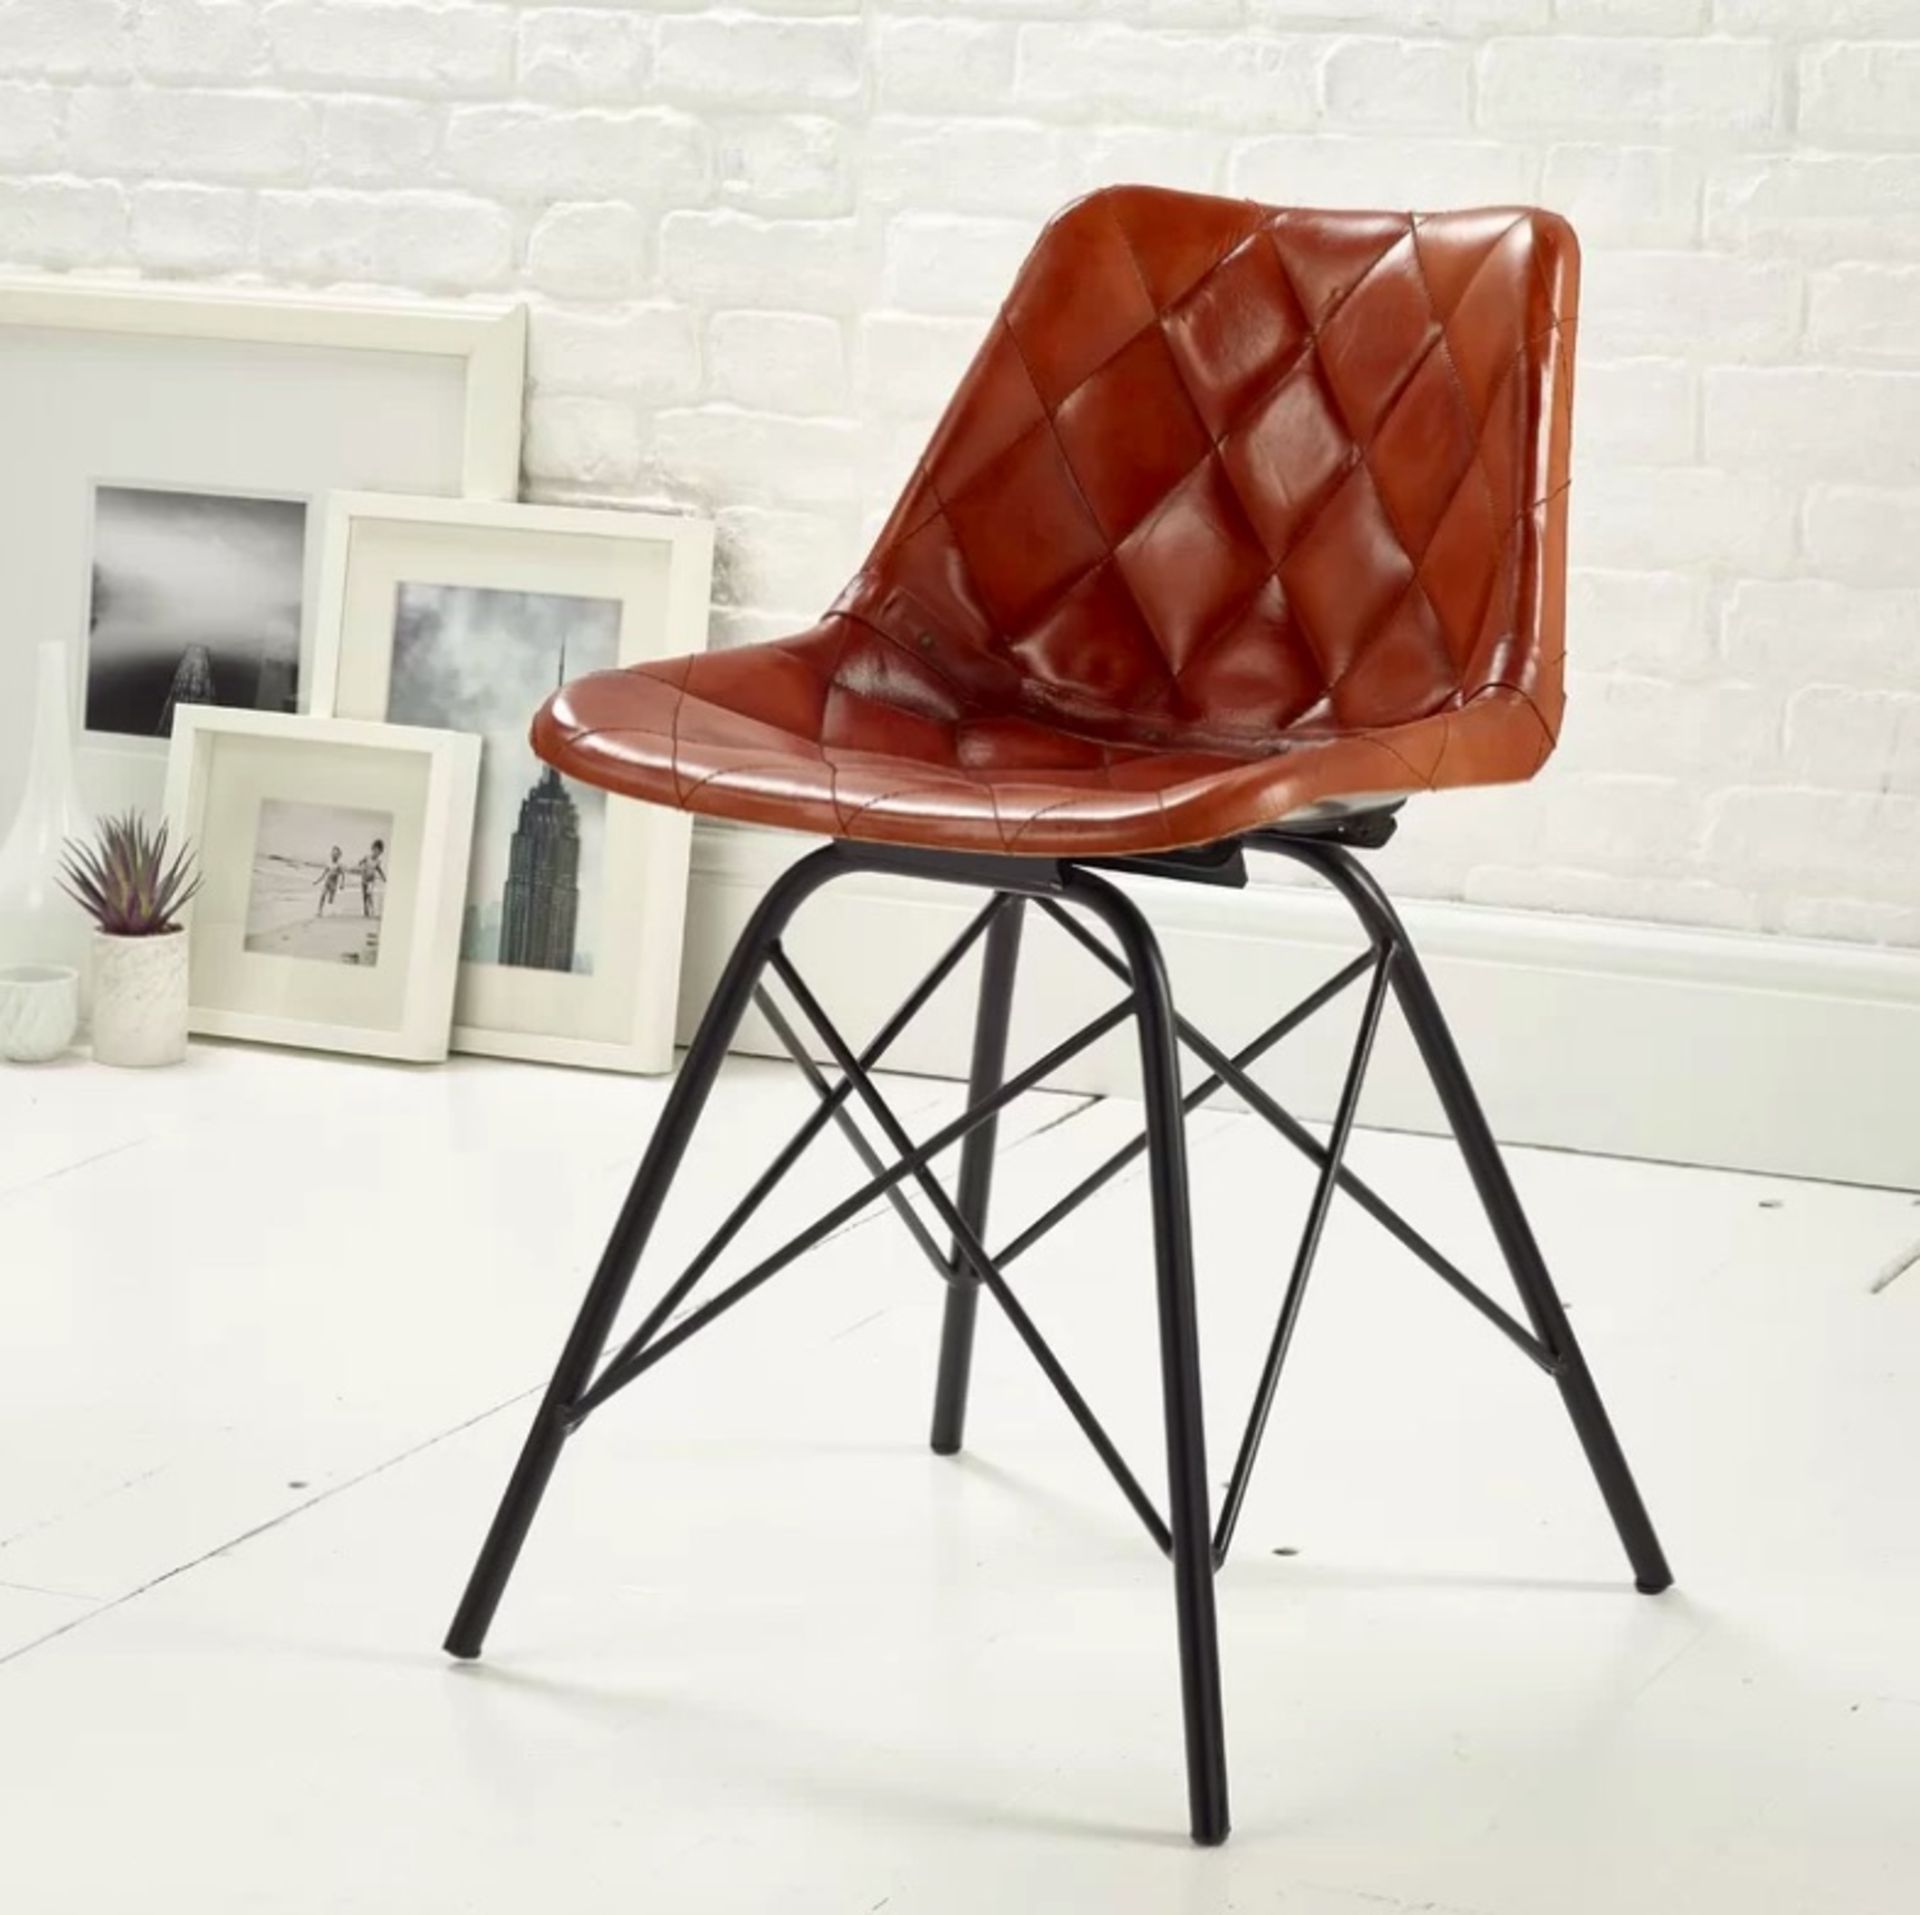 Rustic Genuine Leather Upholstered Dining Chair This Stunning Rustic Genuine Leather Upholstered